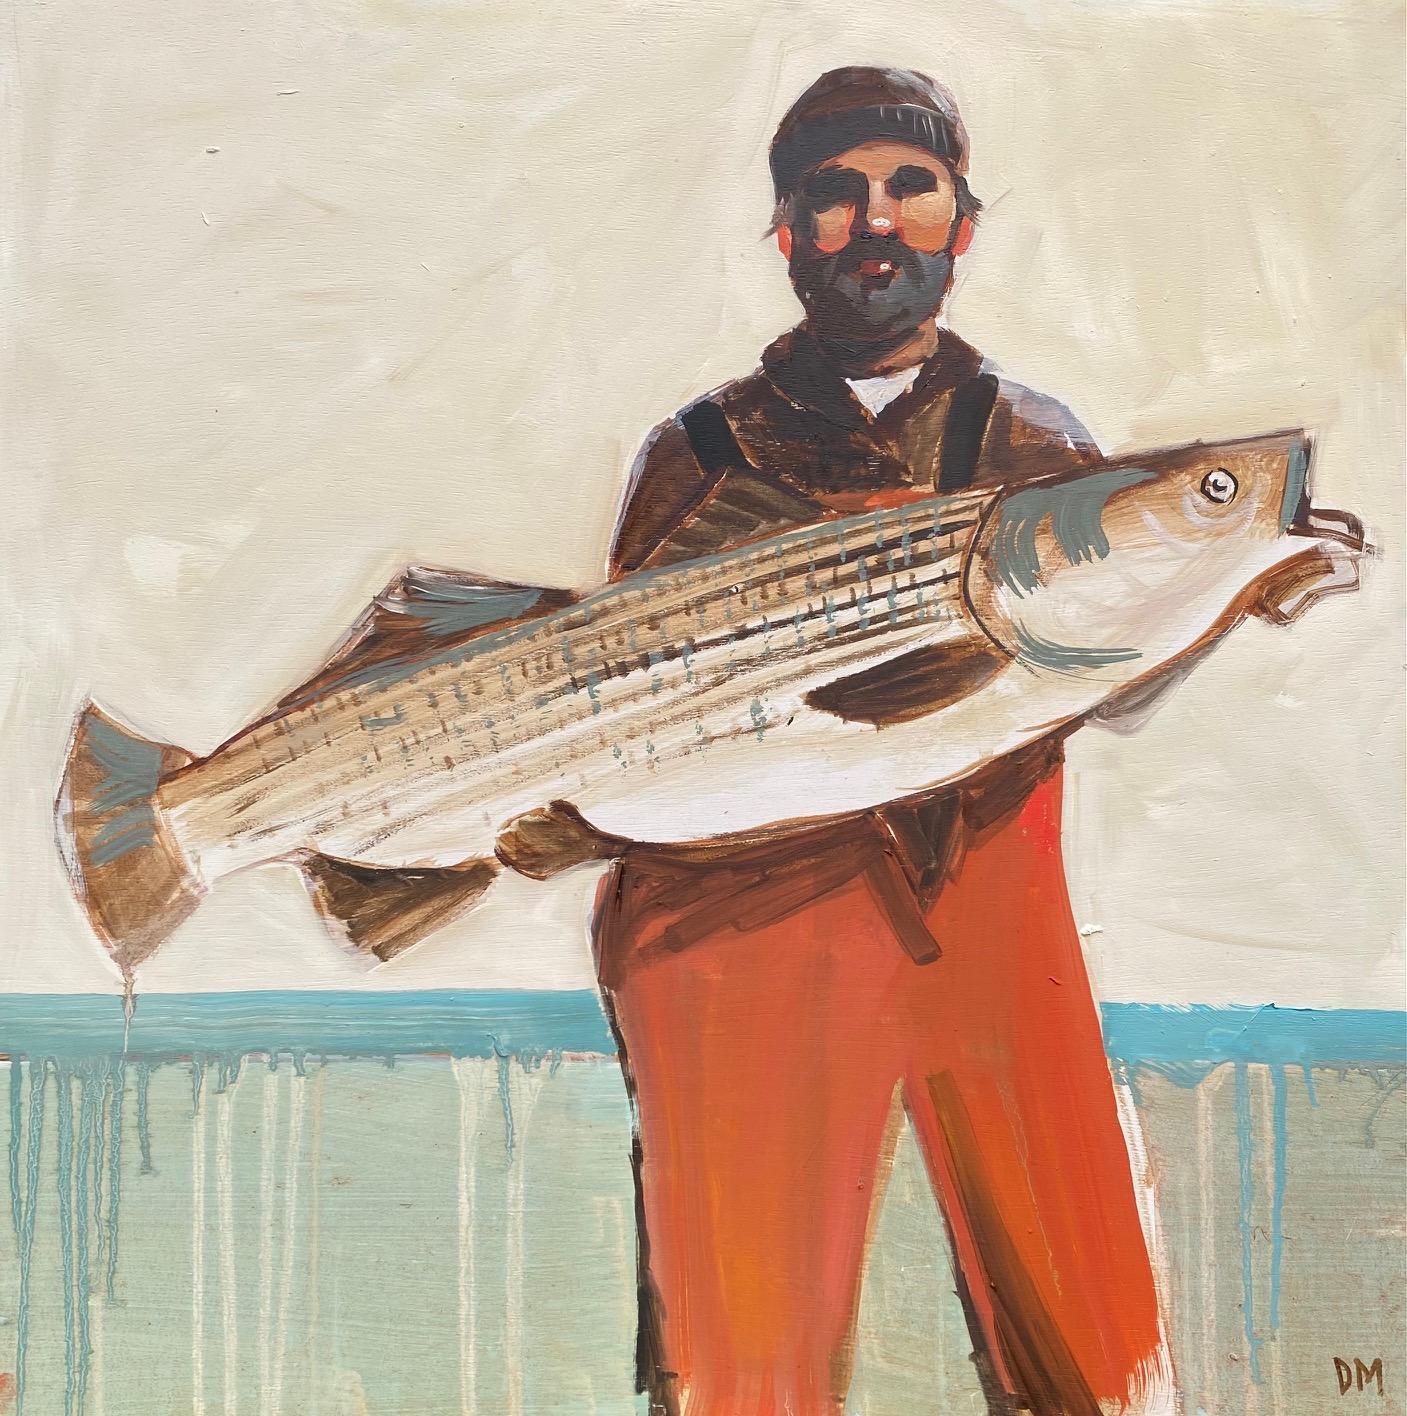 Debbie Miller Figurative Painting - "Lucky Strike" a fun whimsical portrait of a fisherman and fresh catch of day